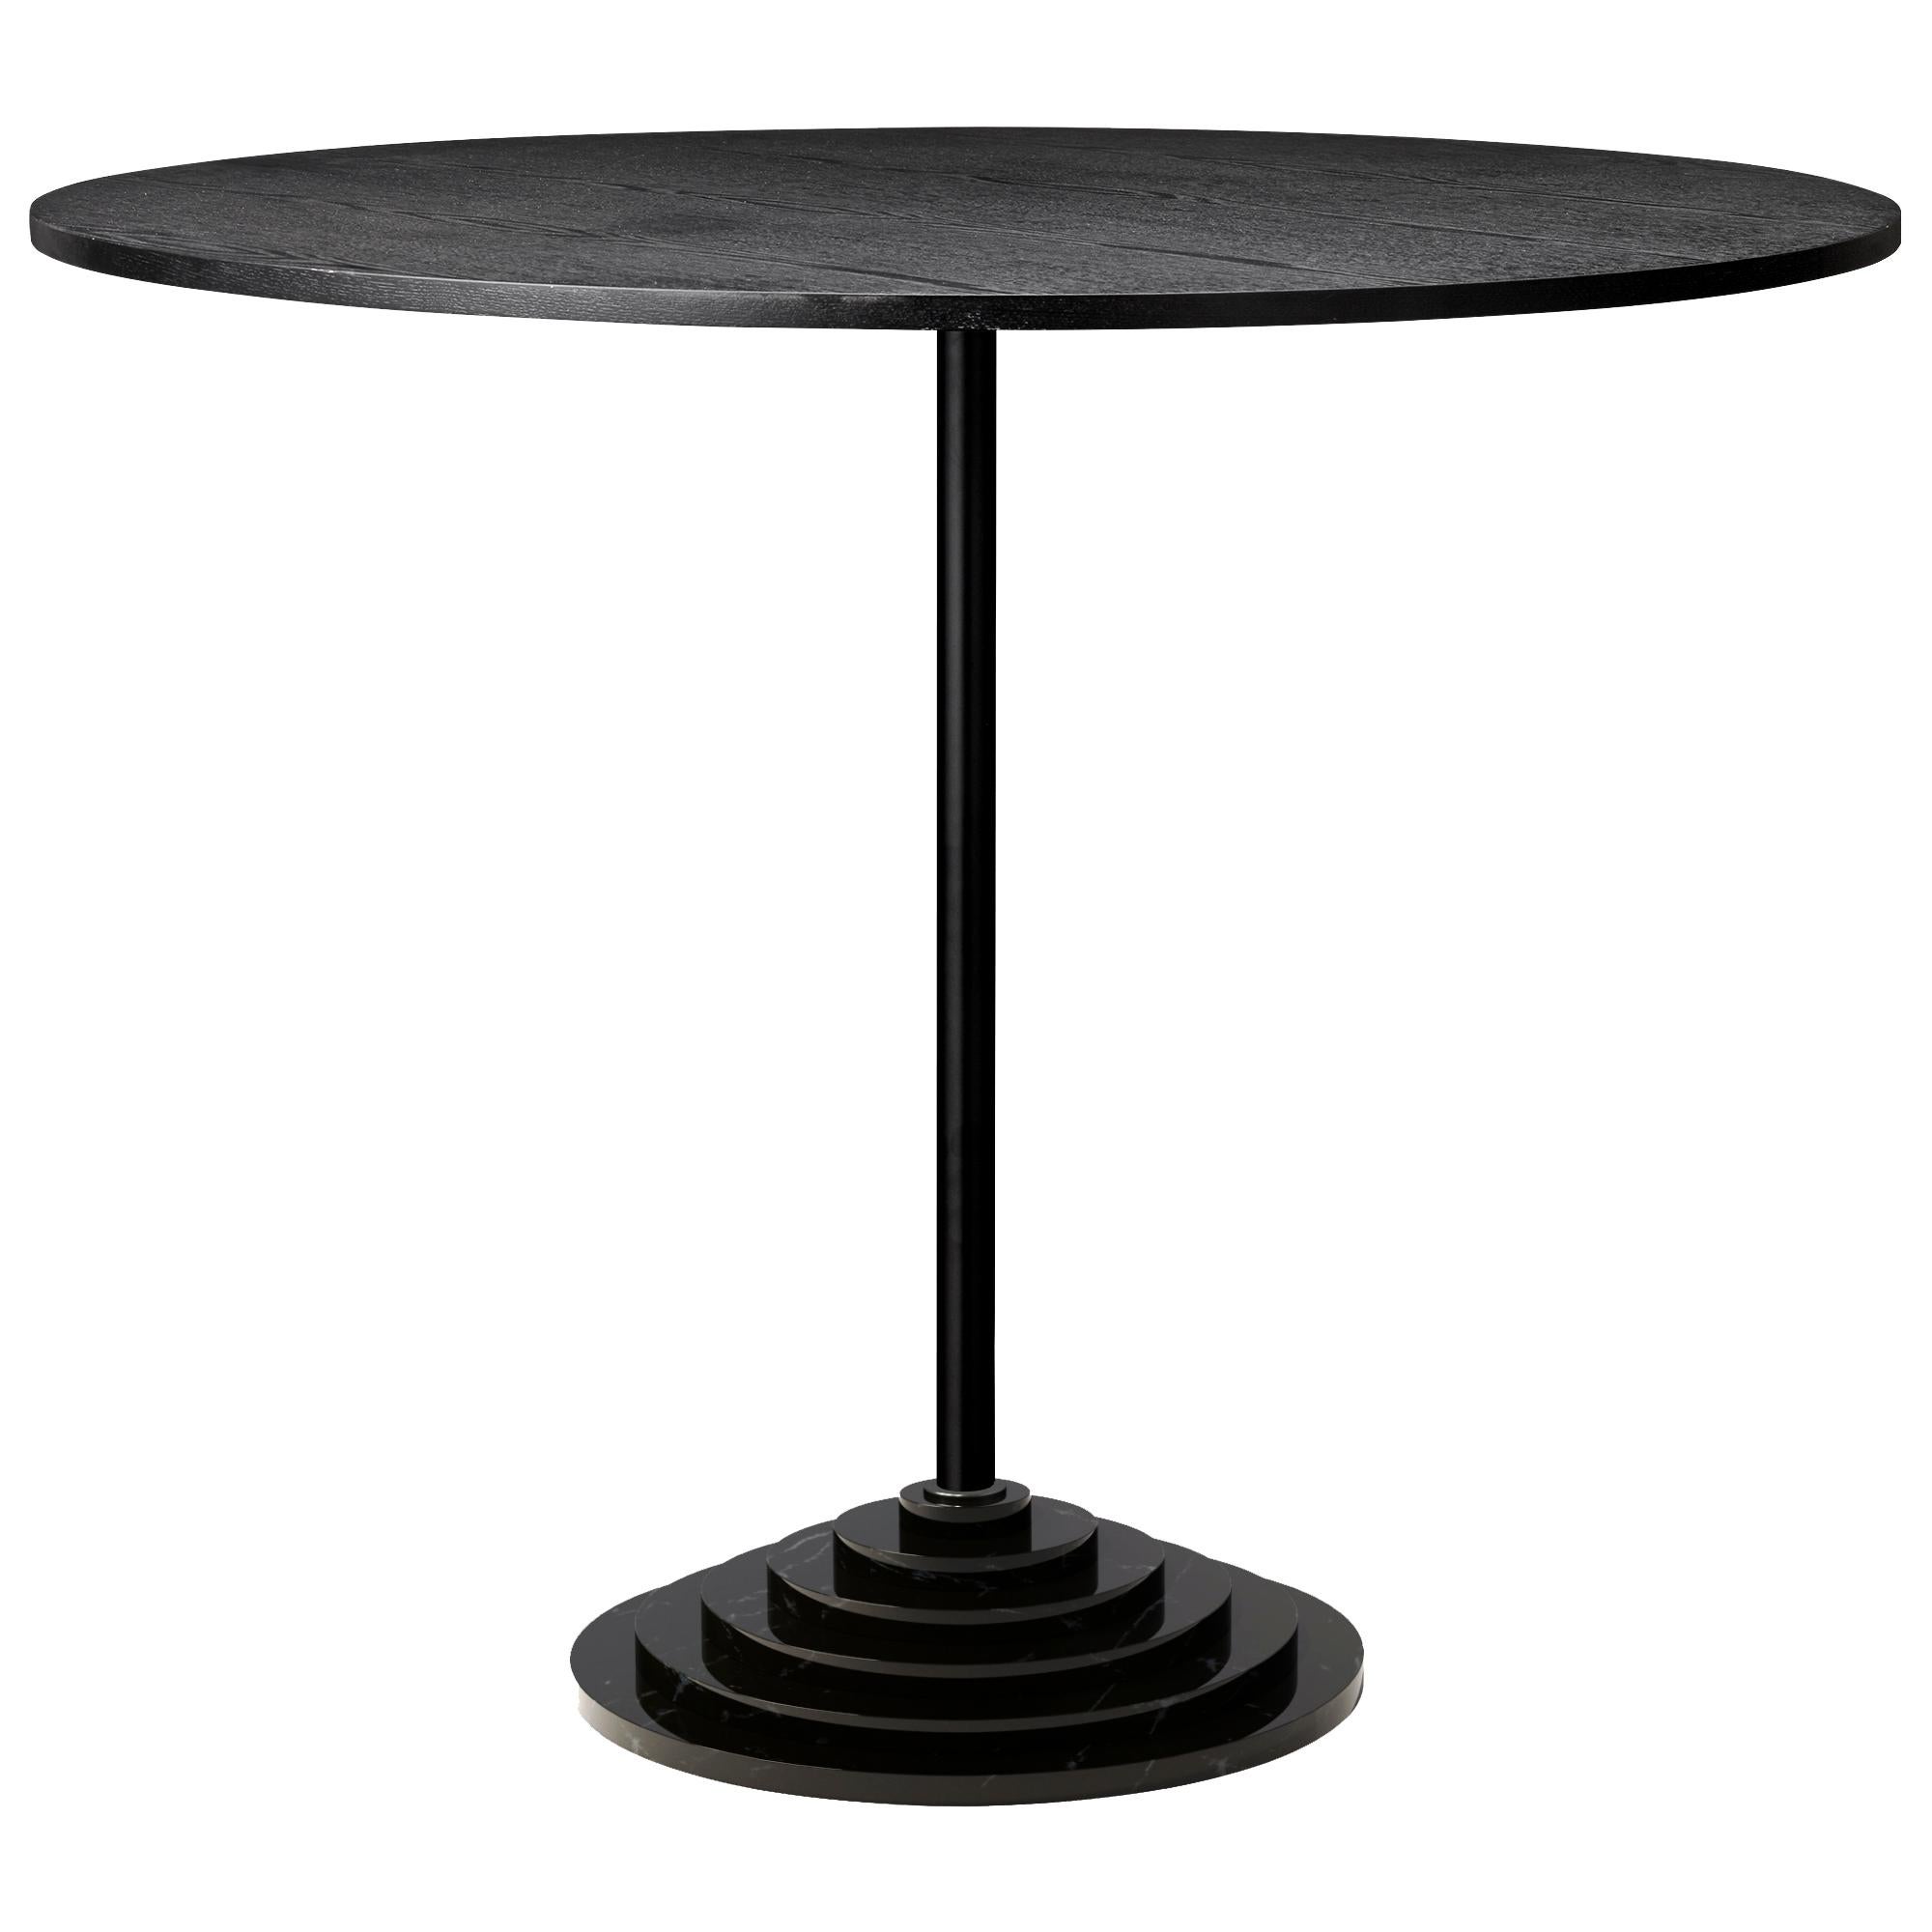 Black marble base side table 
Dimensions: Ø90 x H74 CM
Materials: Steel frame, marble base, veneer

Elegant table with a heavymarble base which creates an unique look.